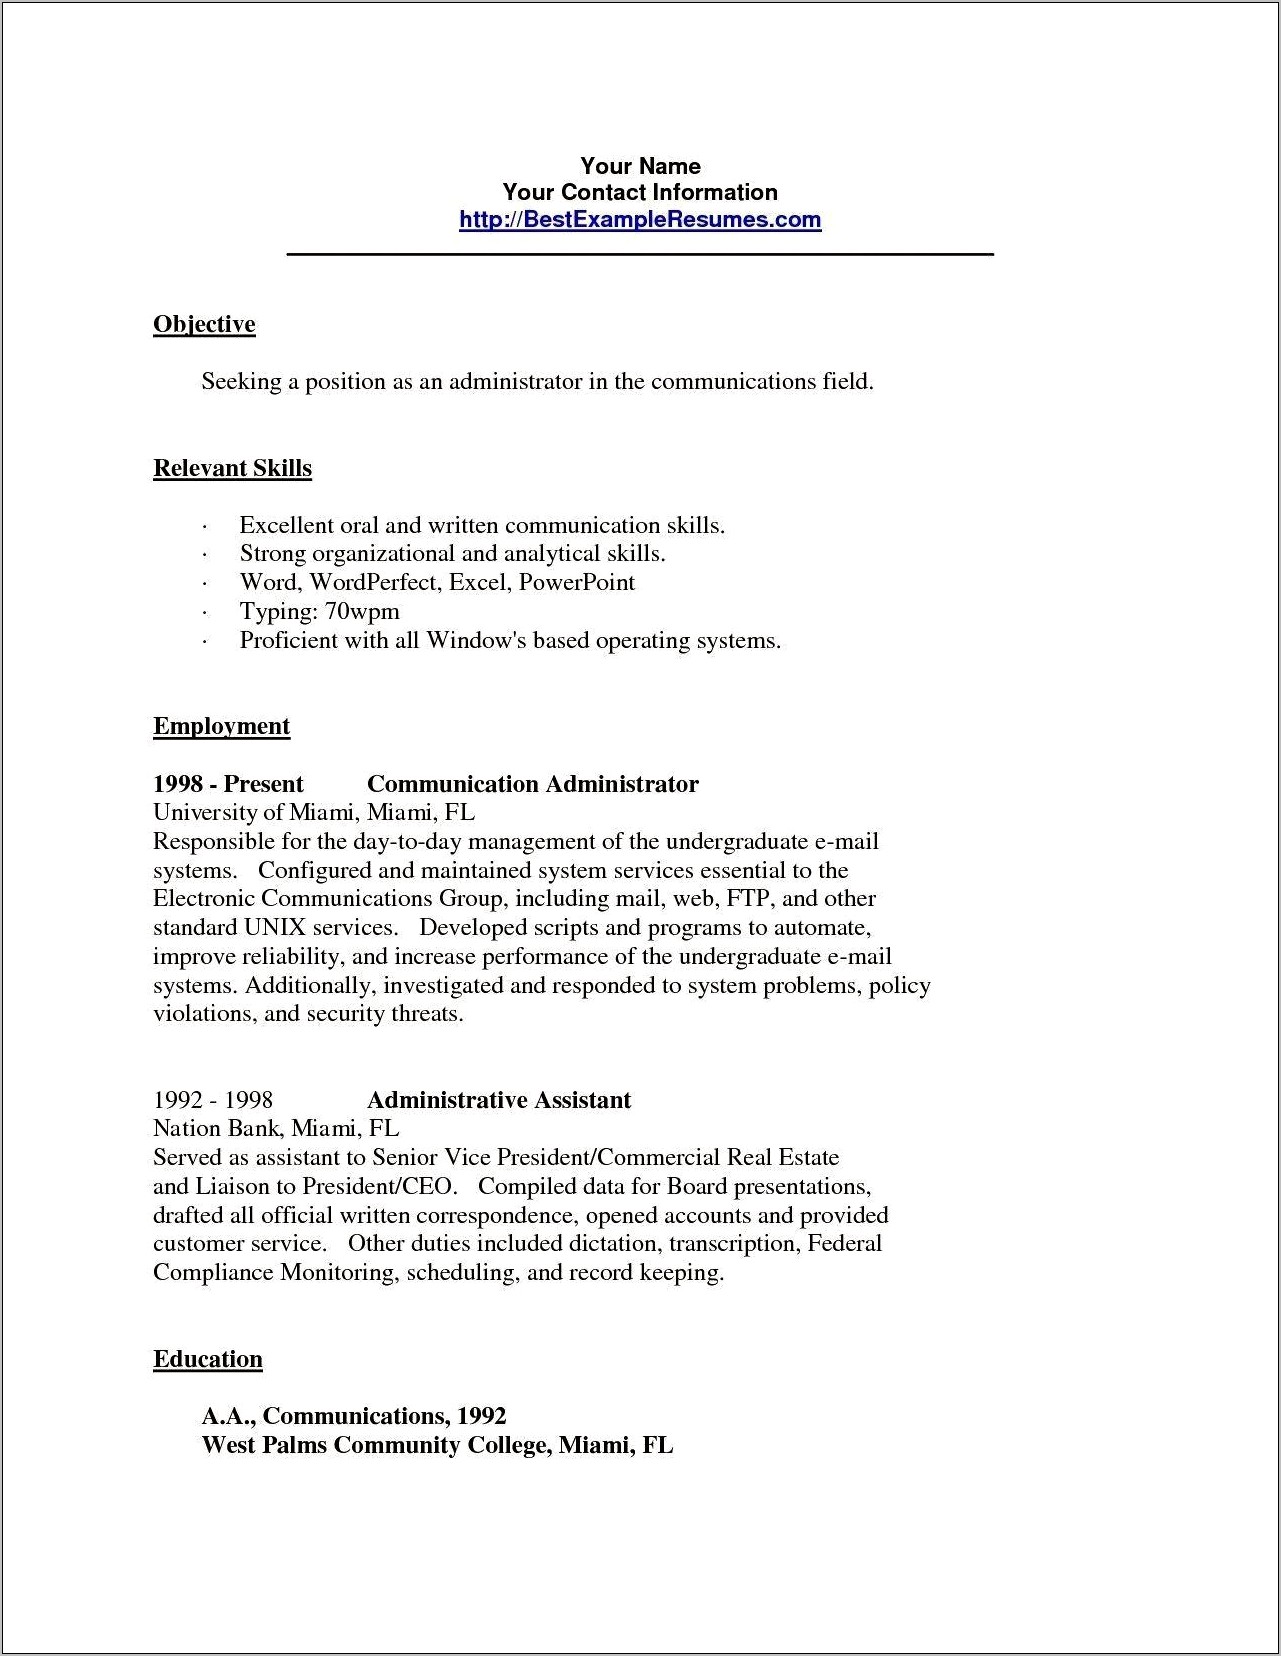 Describe Your Communication Skills Examples On Resume